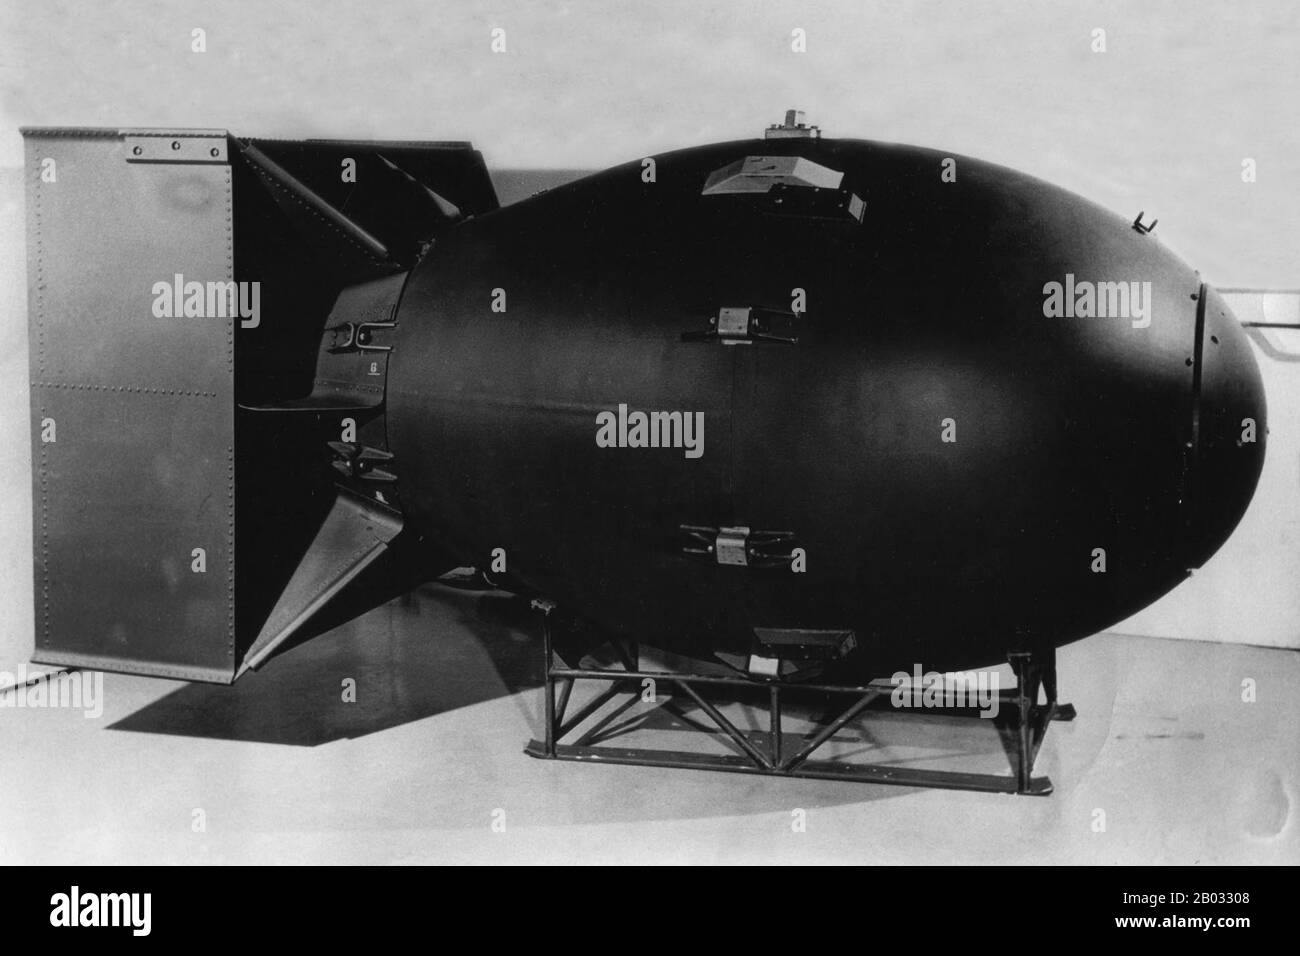 'Fat Man' was the codename for the type of atomic bomb that was detonated over the Japanese city of Nagasaki by the United States on 9 August 1945. It was the second of the only two nuclear weapons ever used in warfare, the first being 'Little Boy', and its detonation marked the third ever man-made nuclear explosion in history.  It was built by scientists and engineers at Los Alamos Laboratory using plutonium from the Hanford Site and dropped from the Boeing B-29 Superfortress Bockscar. Stock Photo